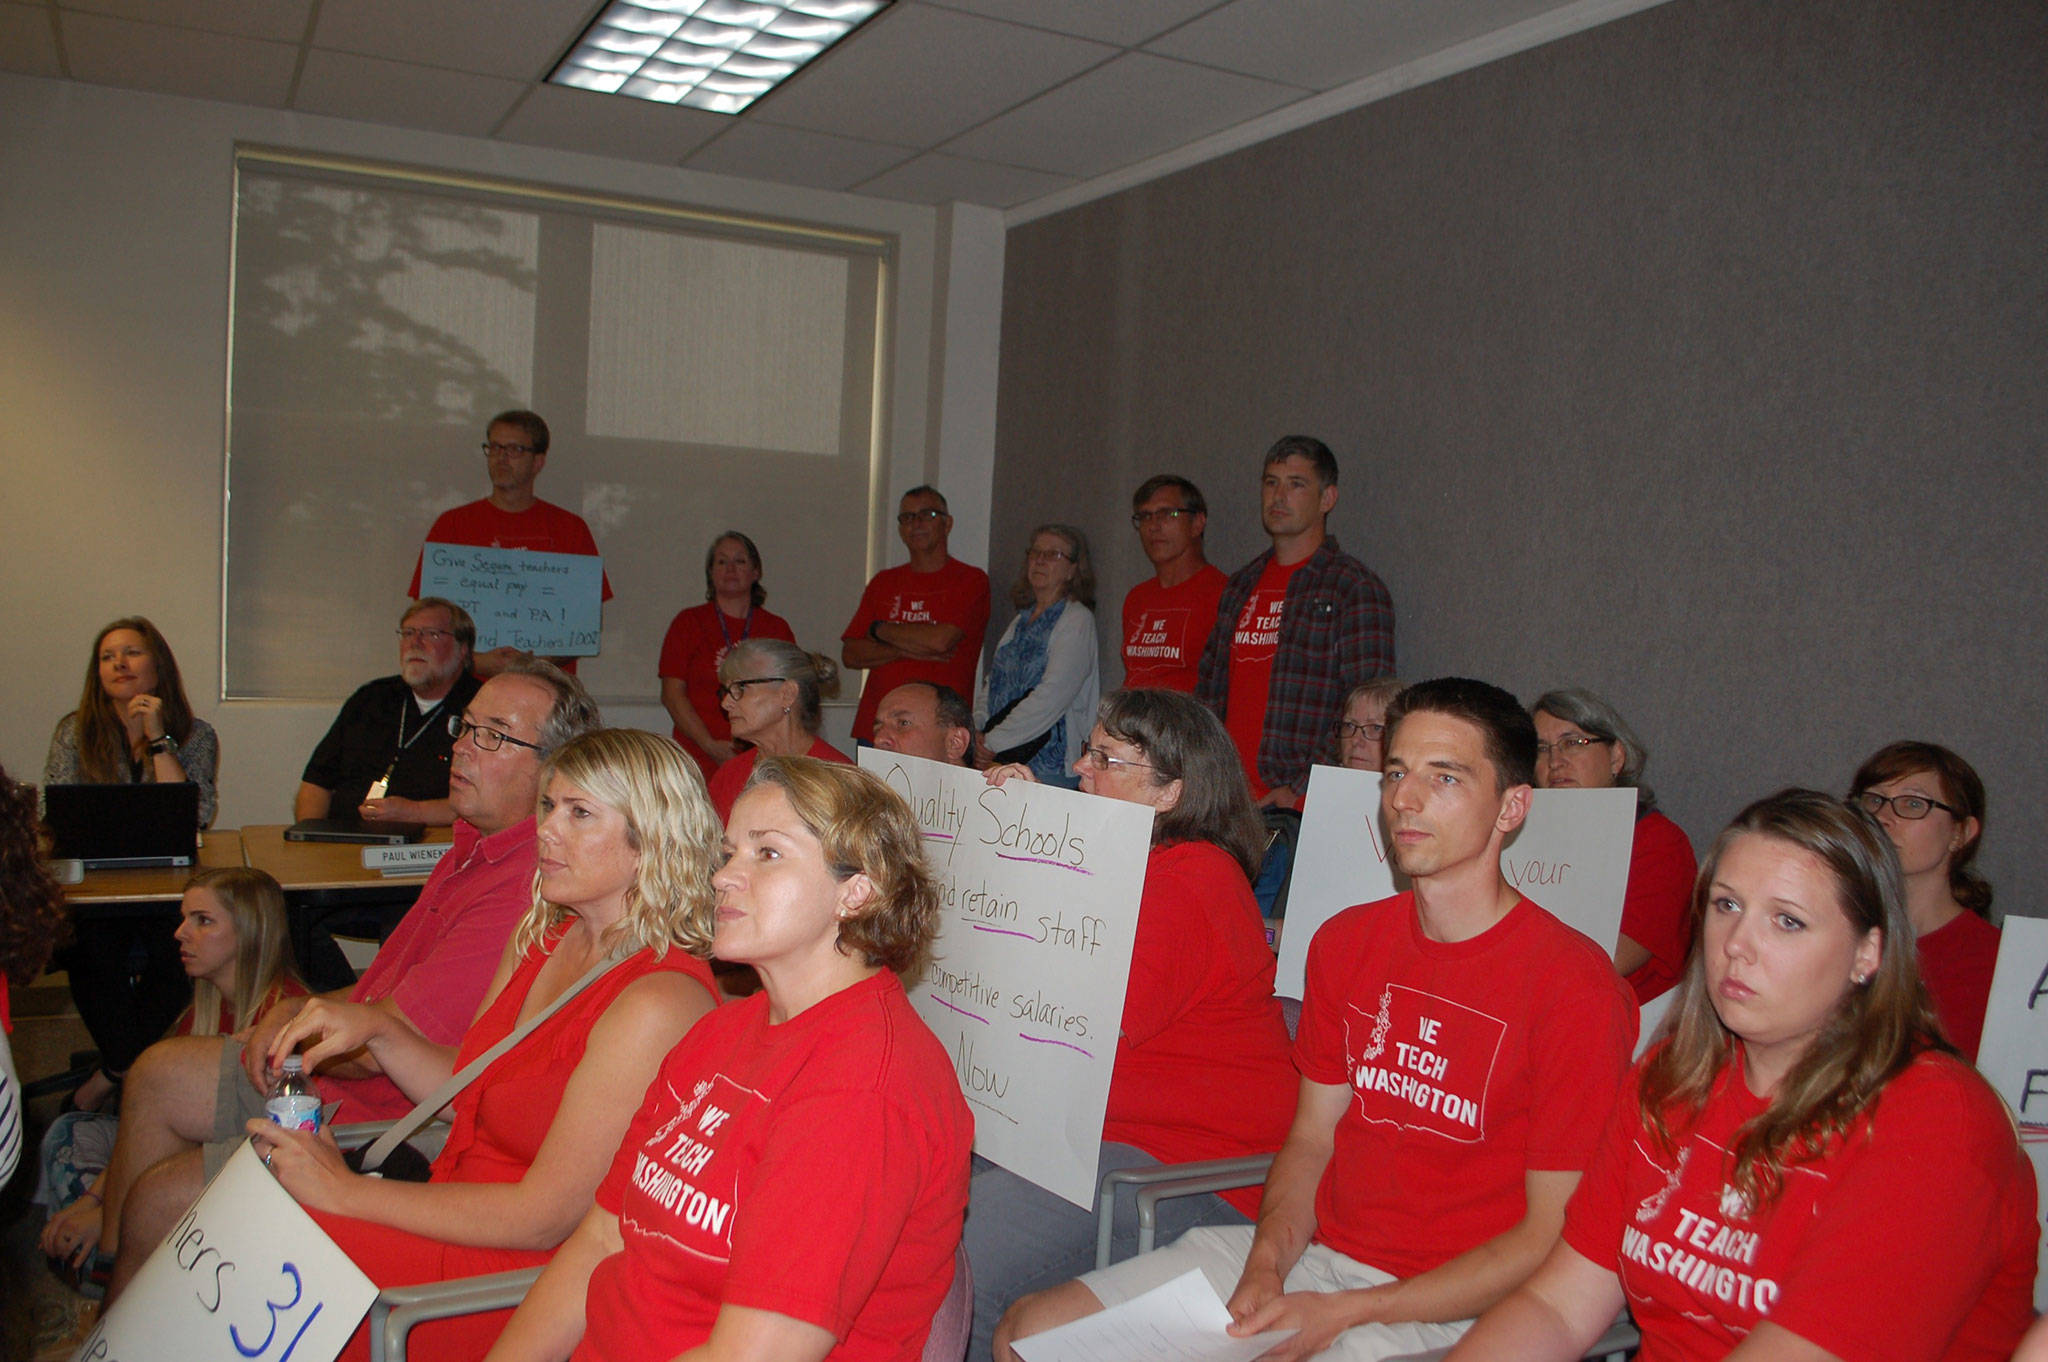 The Sequim Education Association ratified their new contract with Sequim School District on Aug. 29 with a 98 percent approval rate. Last year, teachers lobbied for salary increases at the district boardroom and wore red shirts in solidarity. Teachers did not lobby or strike this year. Sequim Gazette file photo by Erin Hawkins